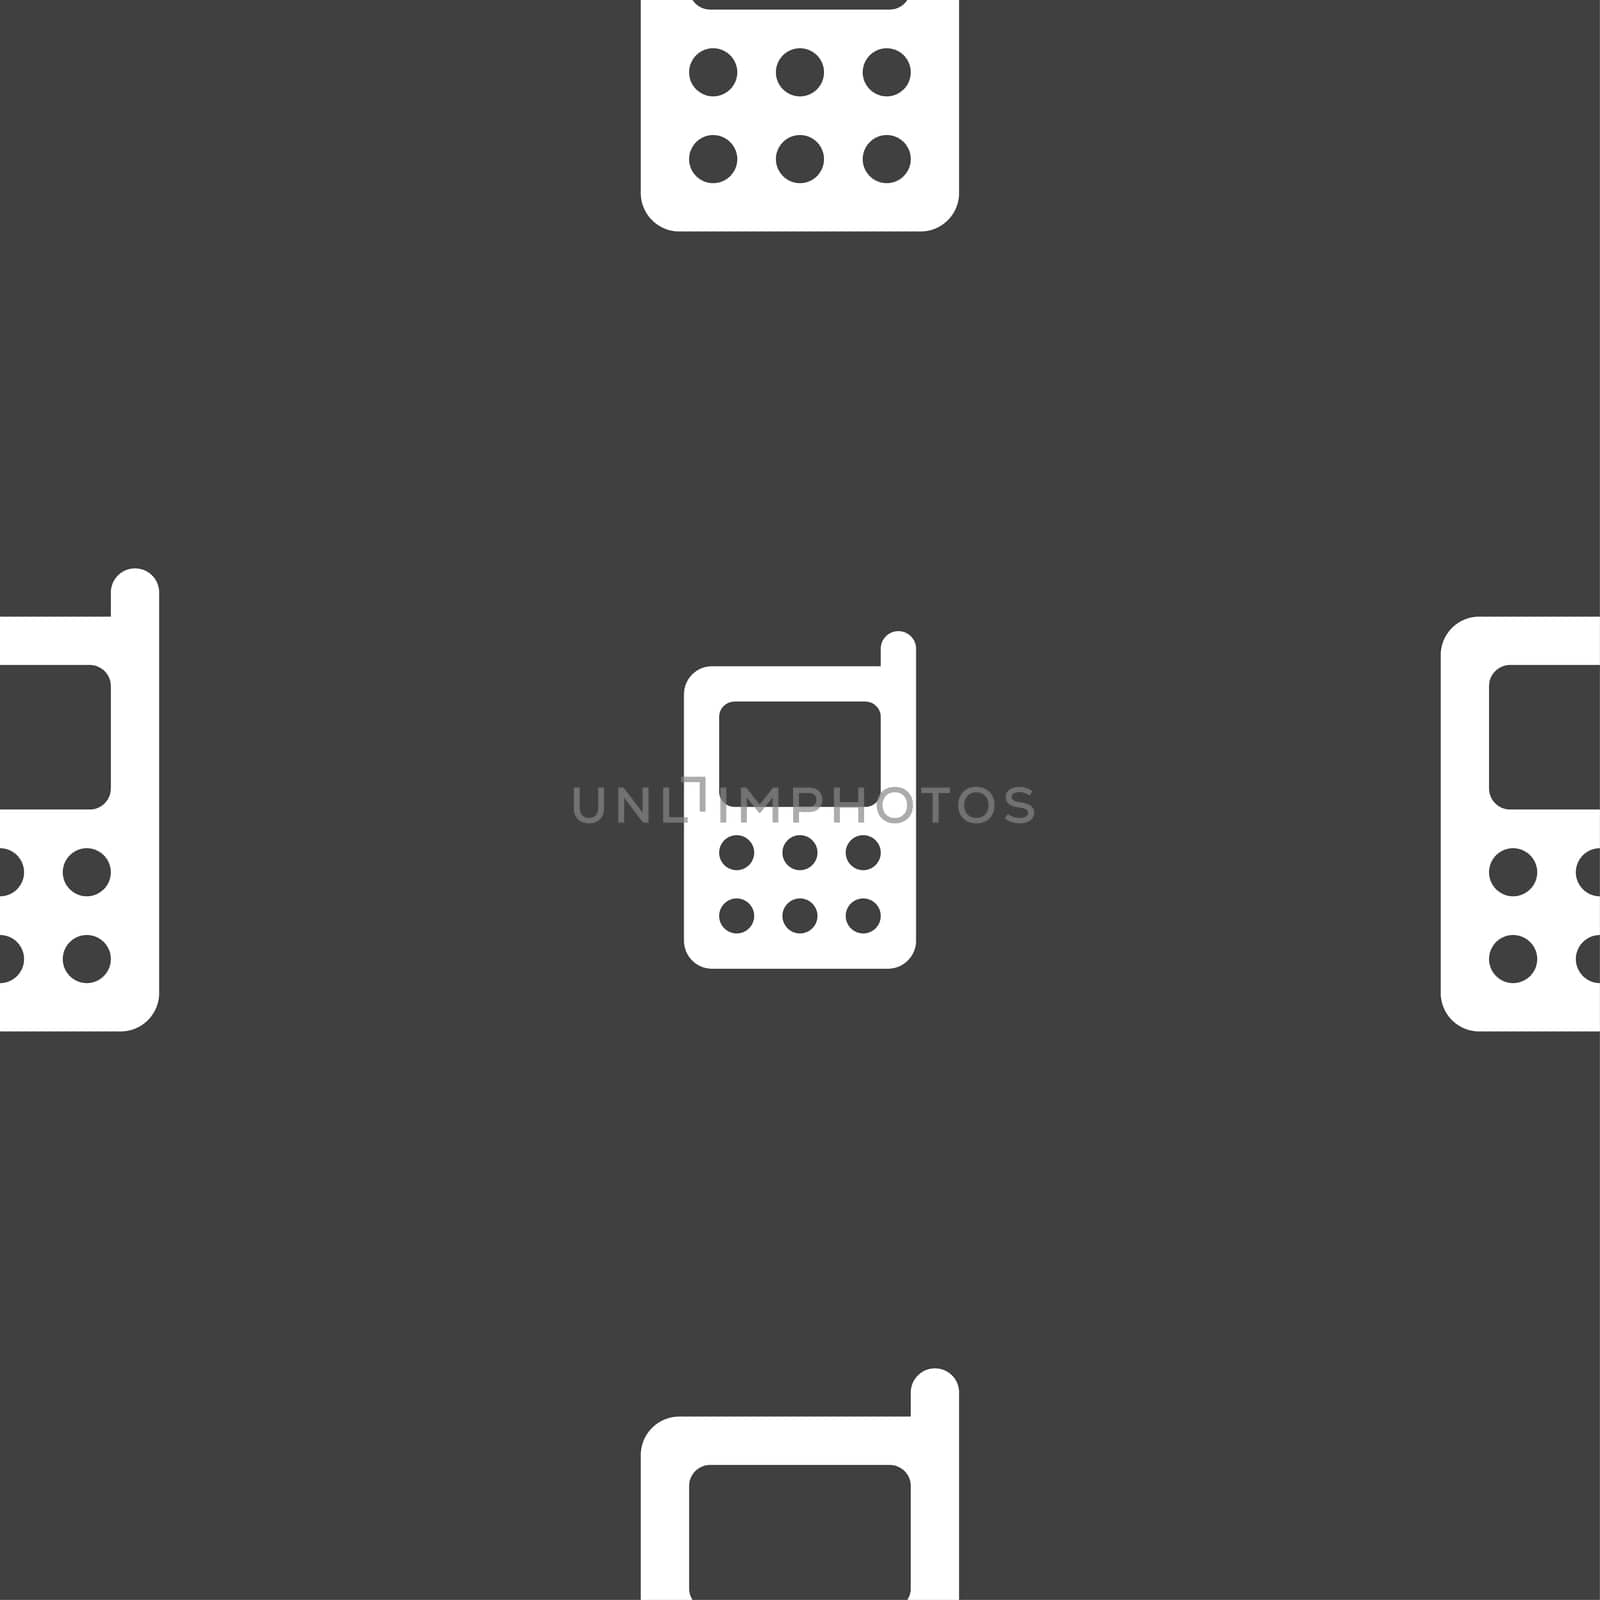 mobile phone icon sign. Seamless pattern on a gray background. illustration